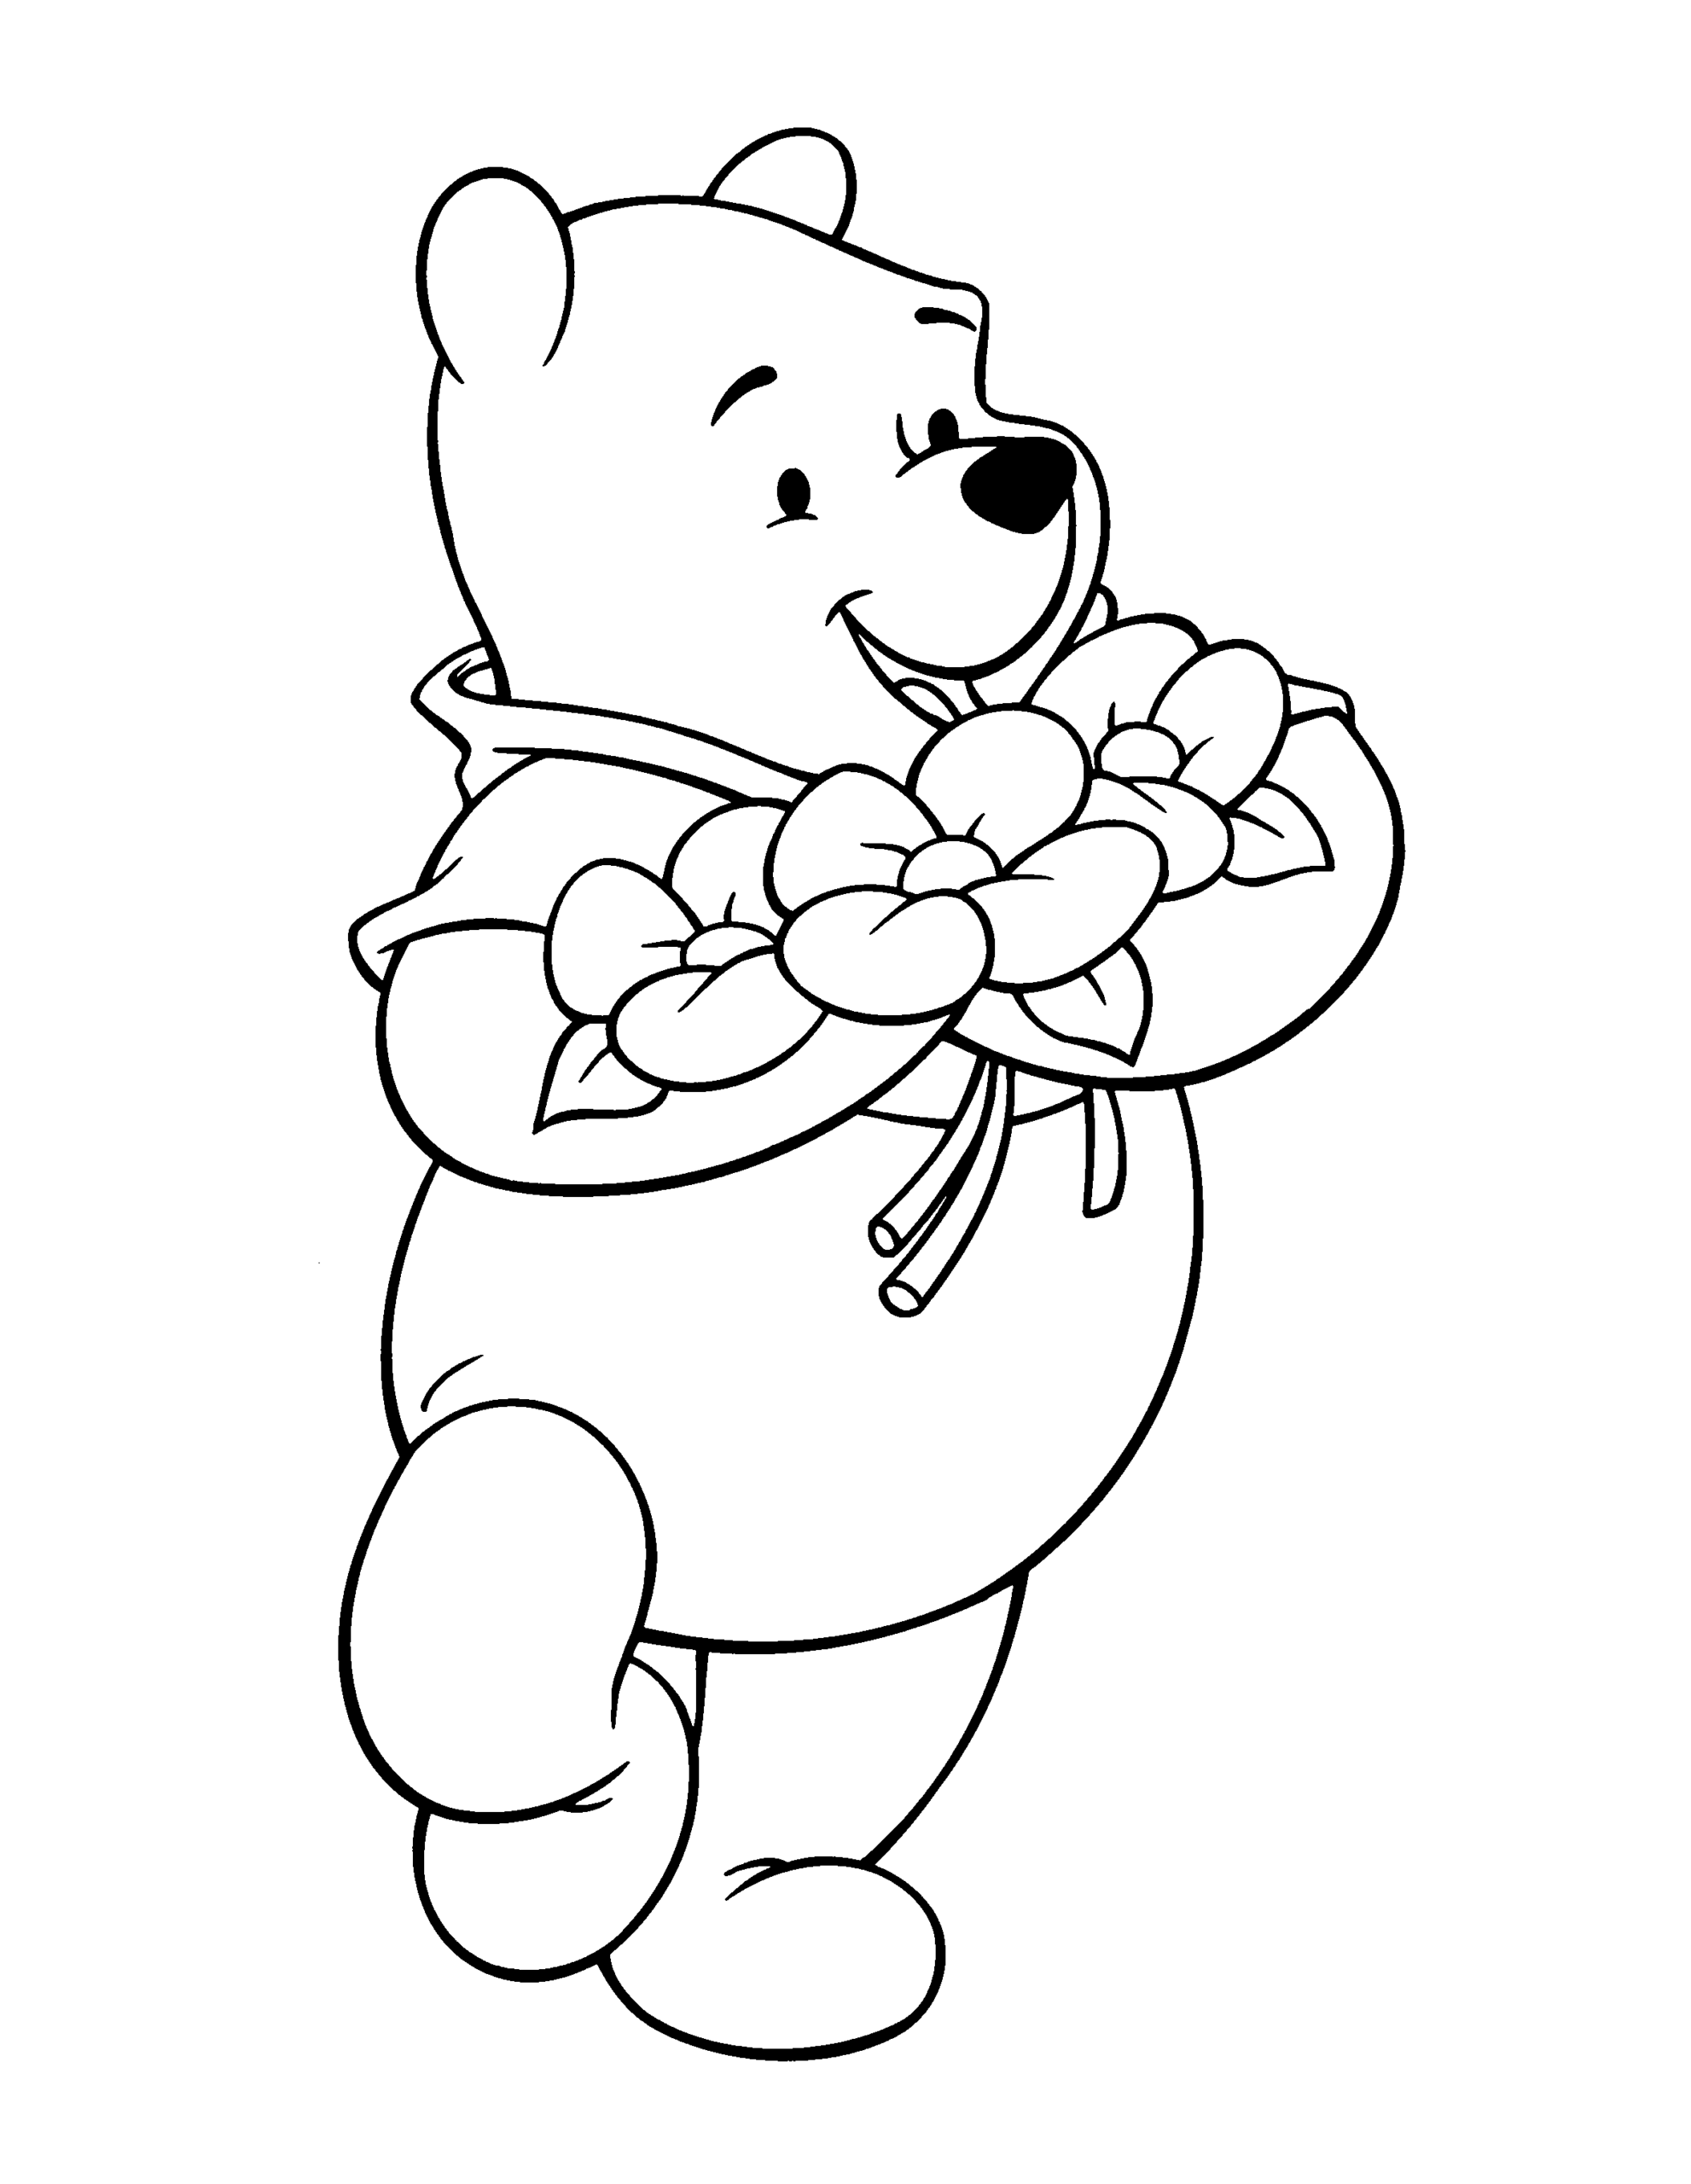 Winnie the Pooh Coloring Pages Cartoons winnie the pooh 69 Printable 2020 7186 Coloring4free